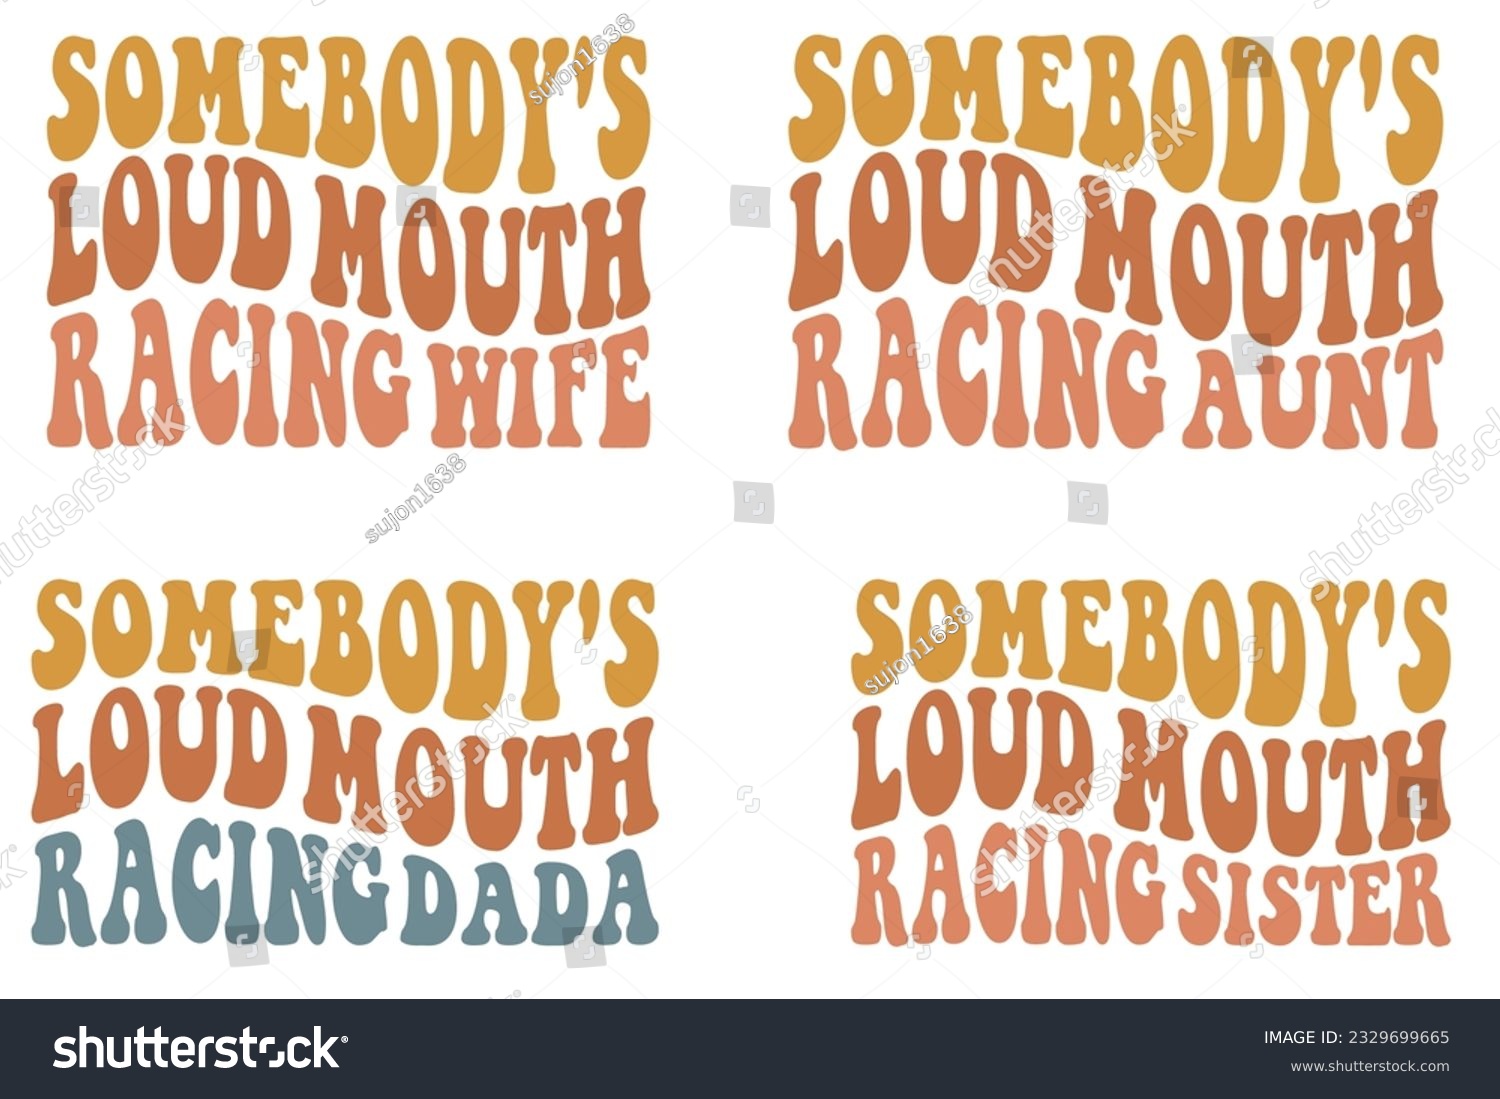 SVG of Somebody's Loud Mouth Racing Wife, Somebody's Loud Mouth Racing Aunt, Somebody's Loud Mouth Racing Dada, Somebody's Loud Mouth Racing sister retro wavy SVG bundle T-shirt svg